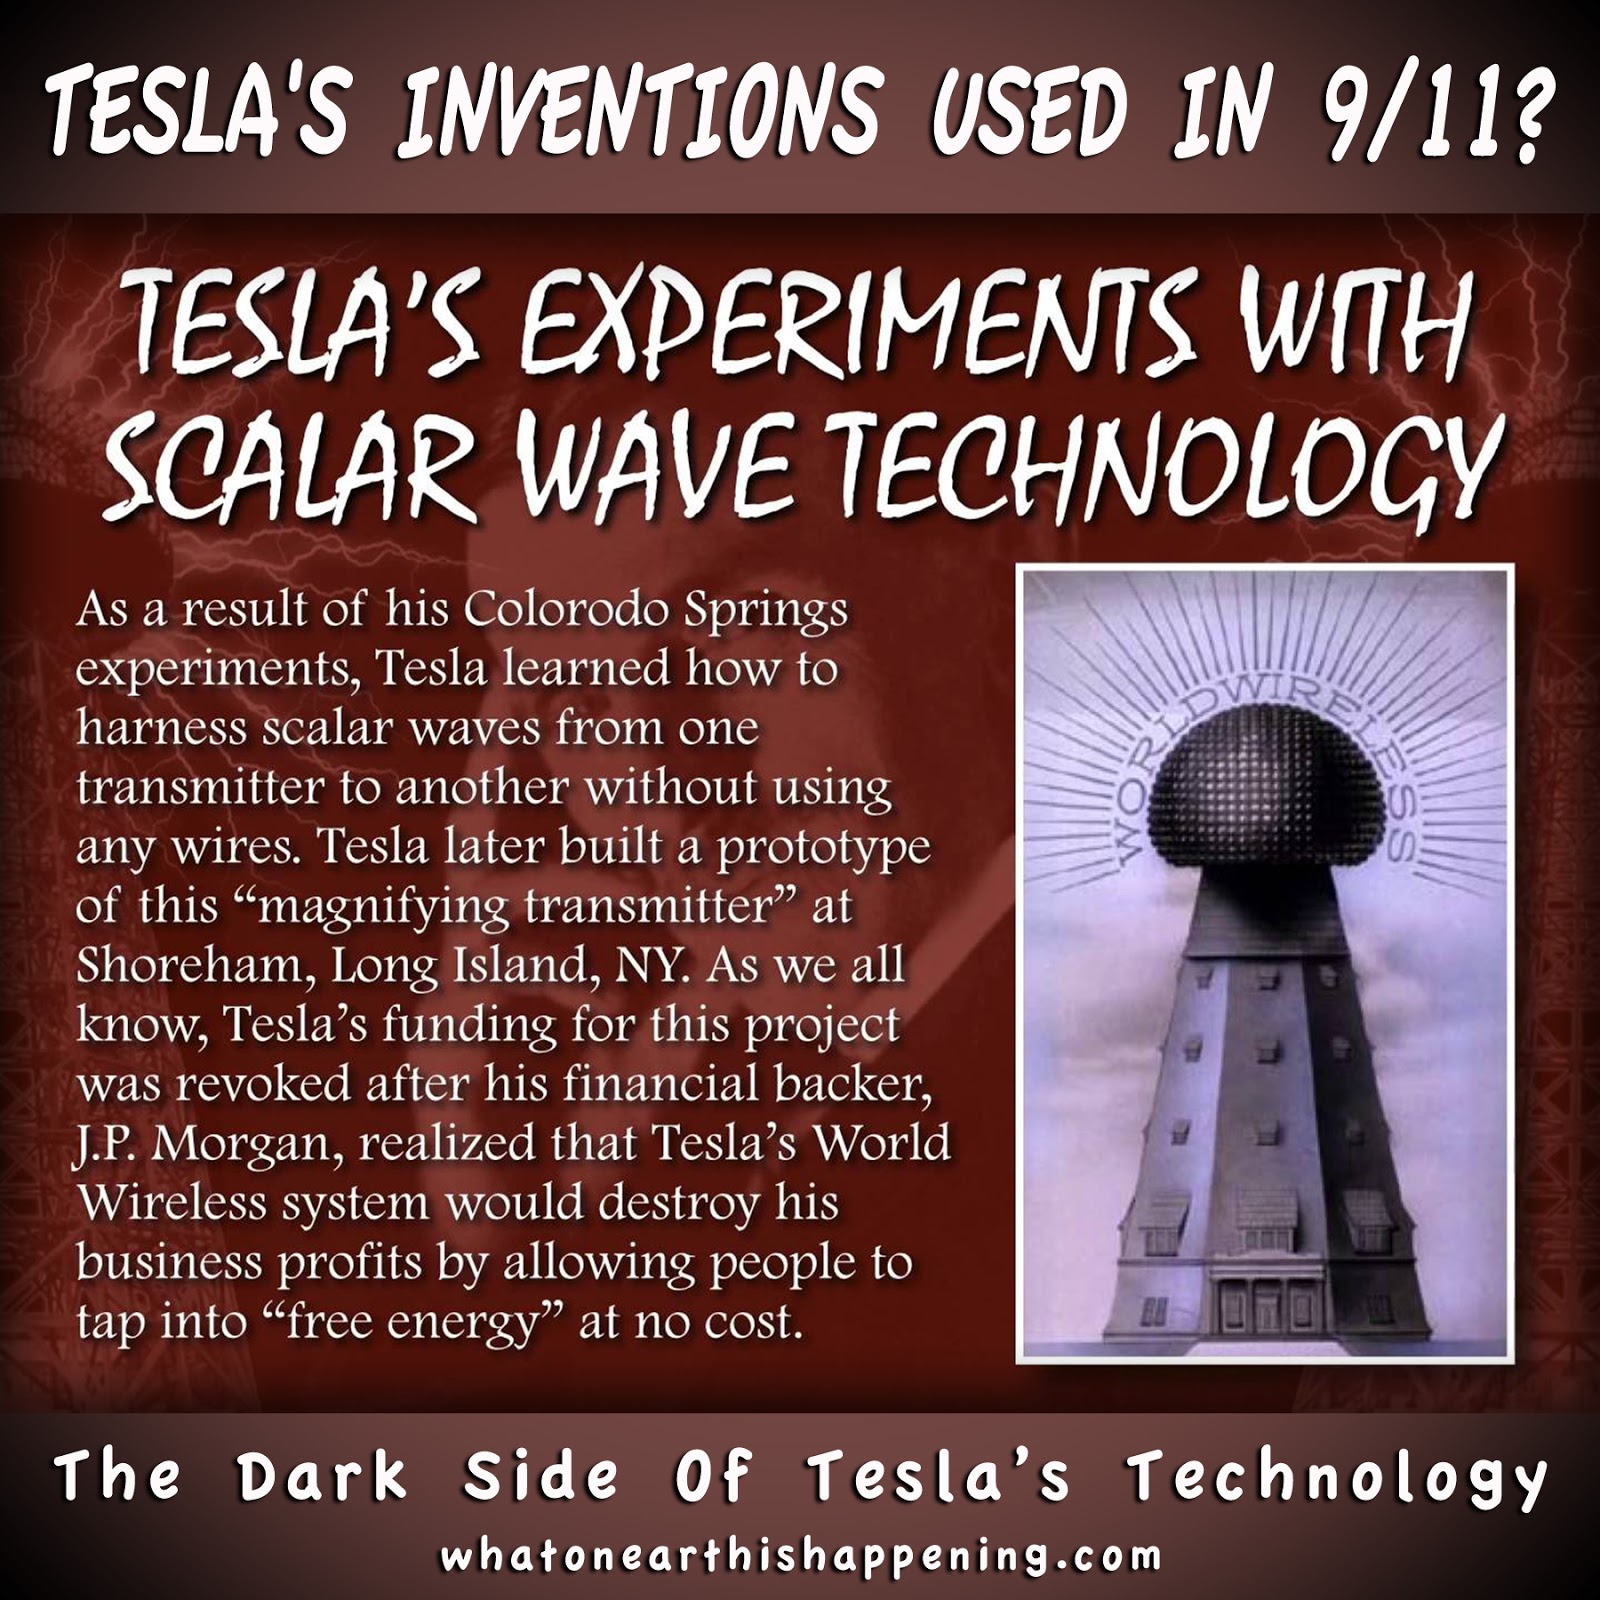 Stillness in the Storm Editor The following presentation by researcher Mark Passio discusses Nikola Tesla s inventions scalar wave technology and links